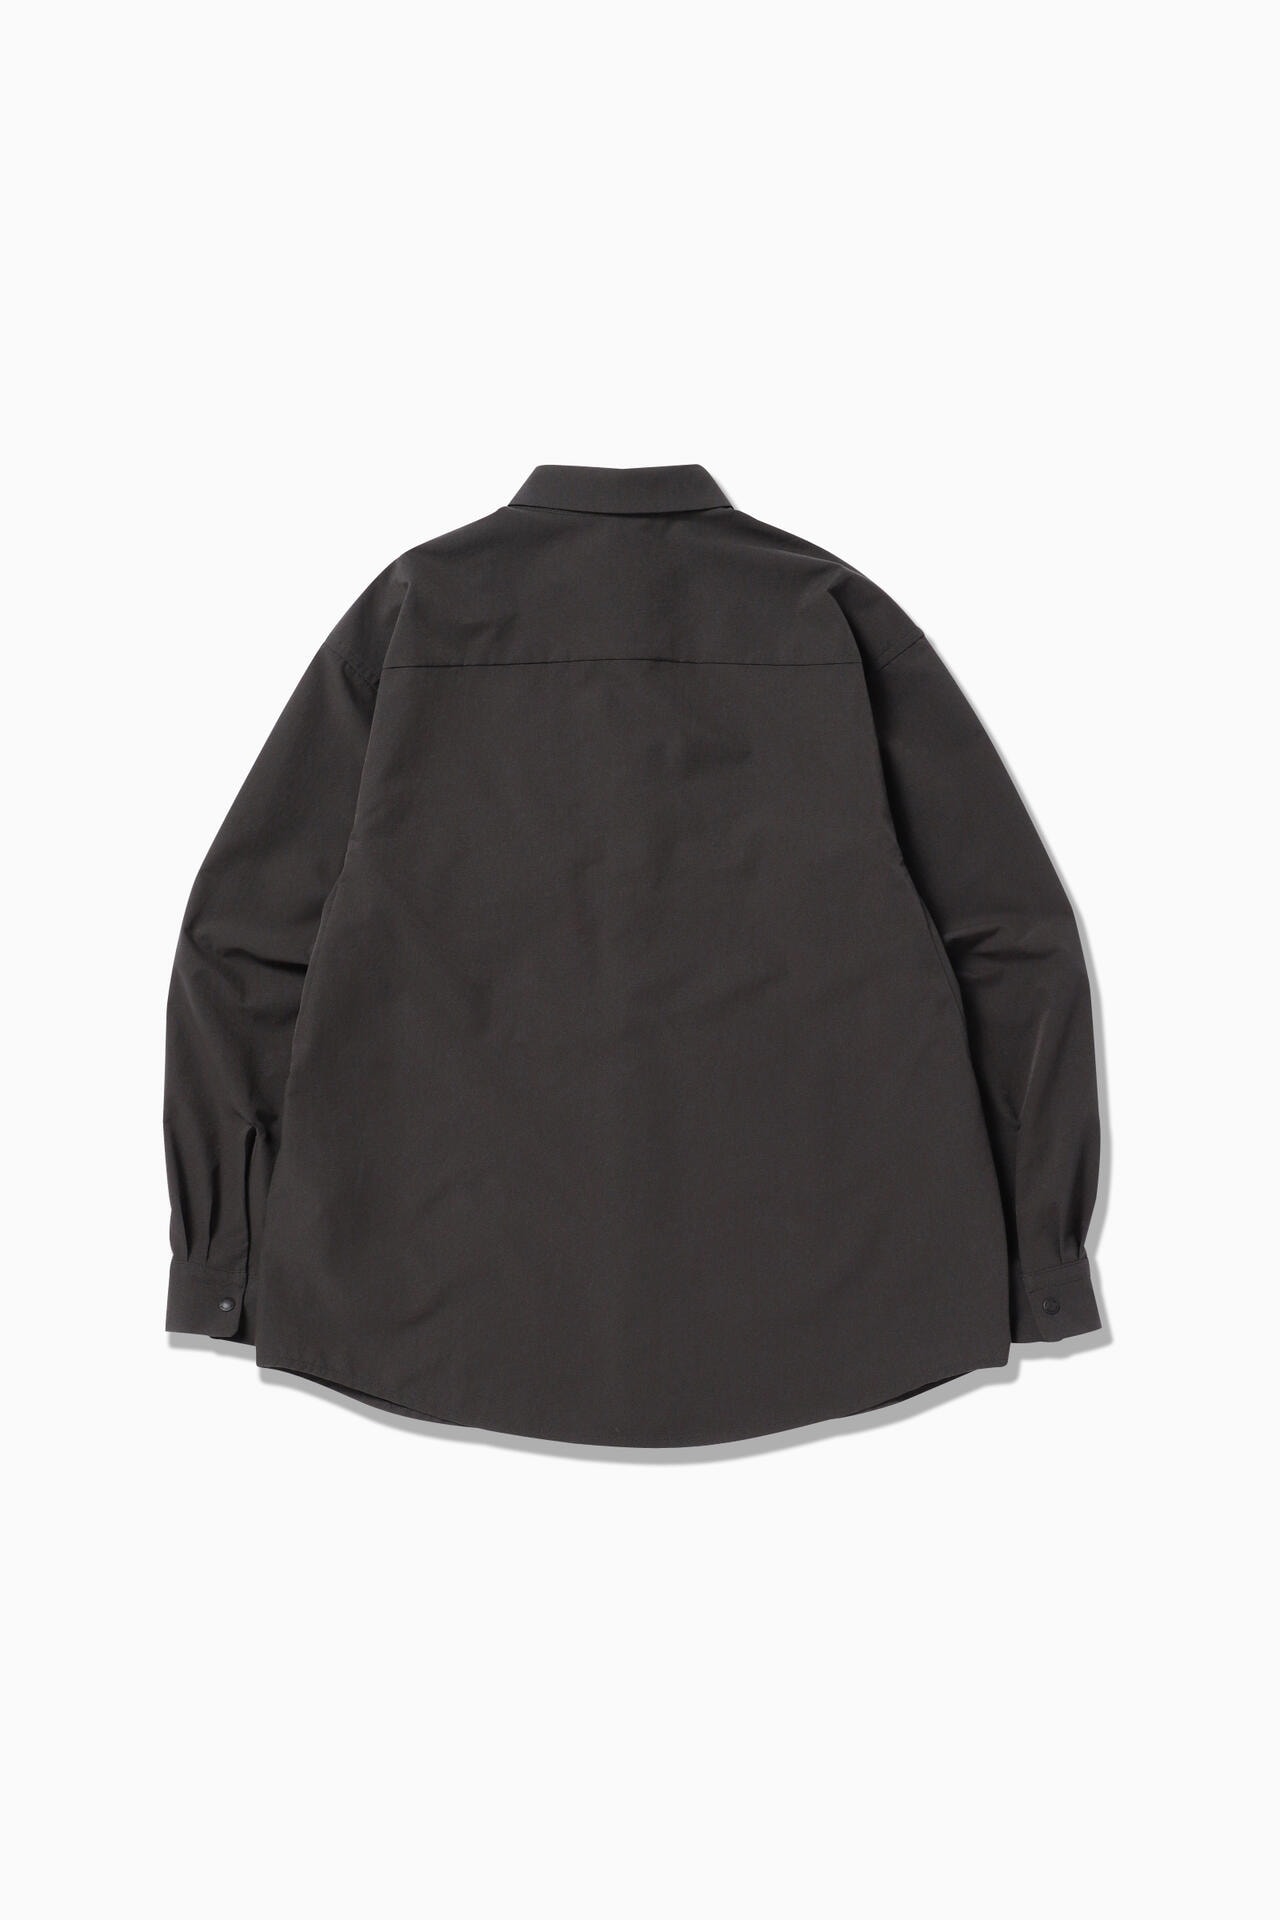 dry breathable LS shirt